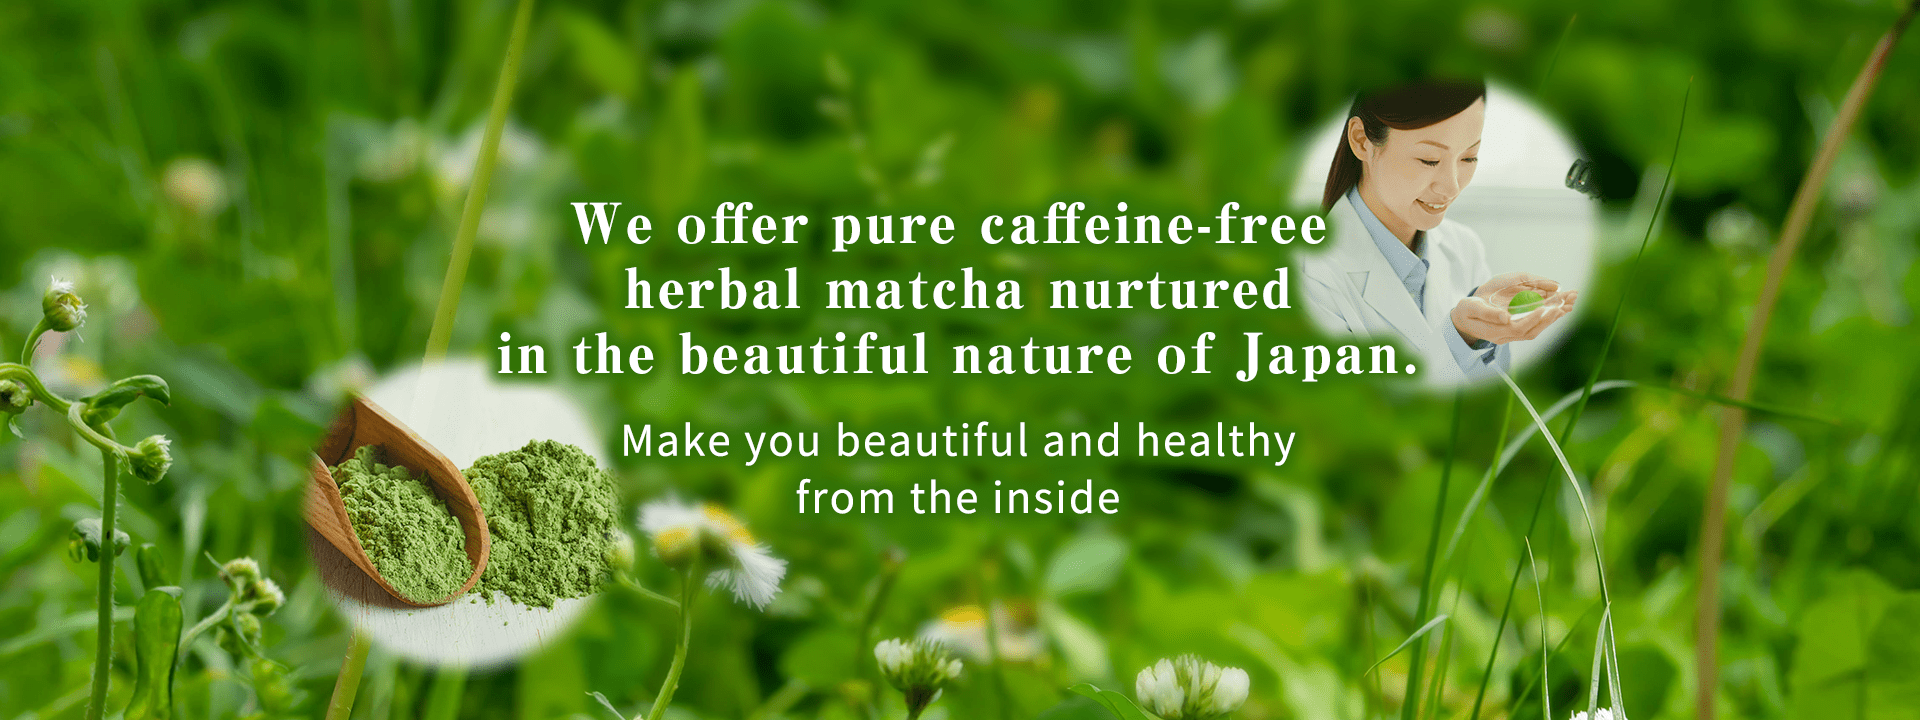 We offer pure caffeine-free herbal matcha nurtured in the beautiful nature of Japan.～Make you beautiful and healthy from the inside～